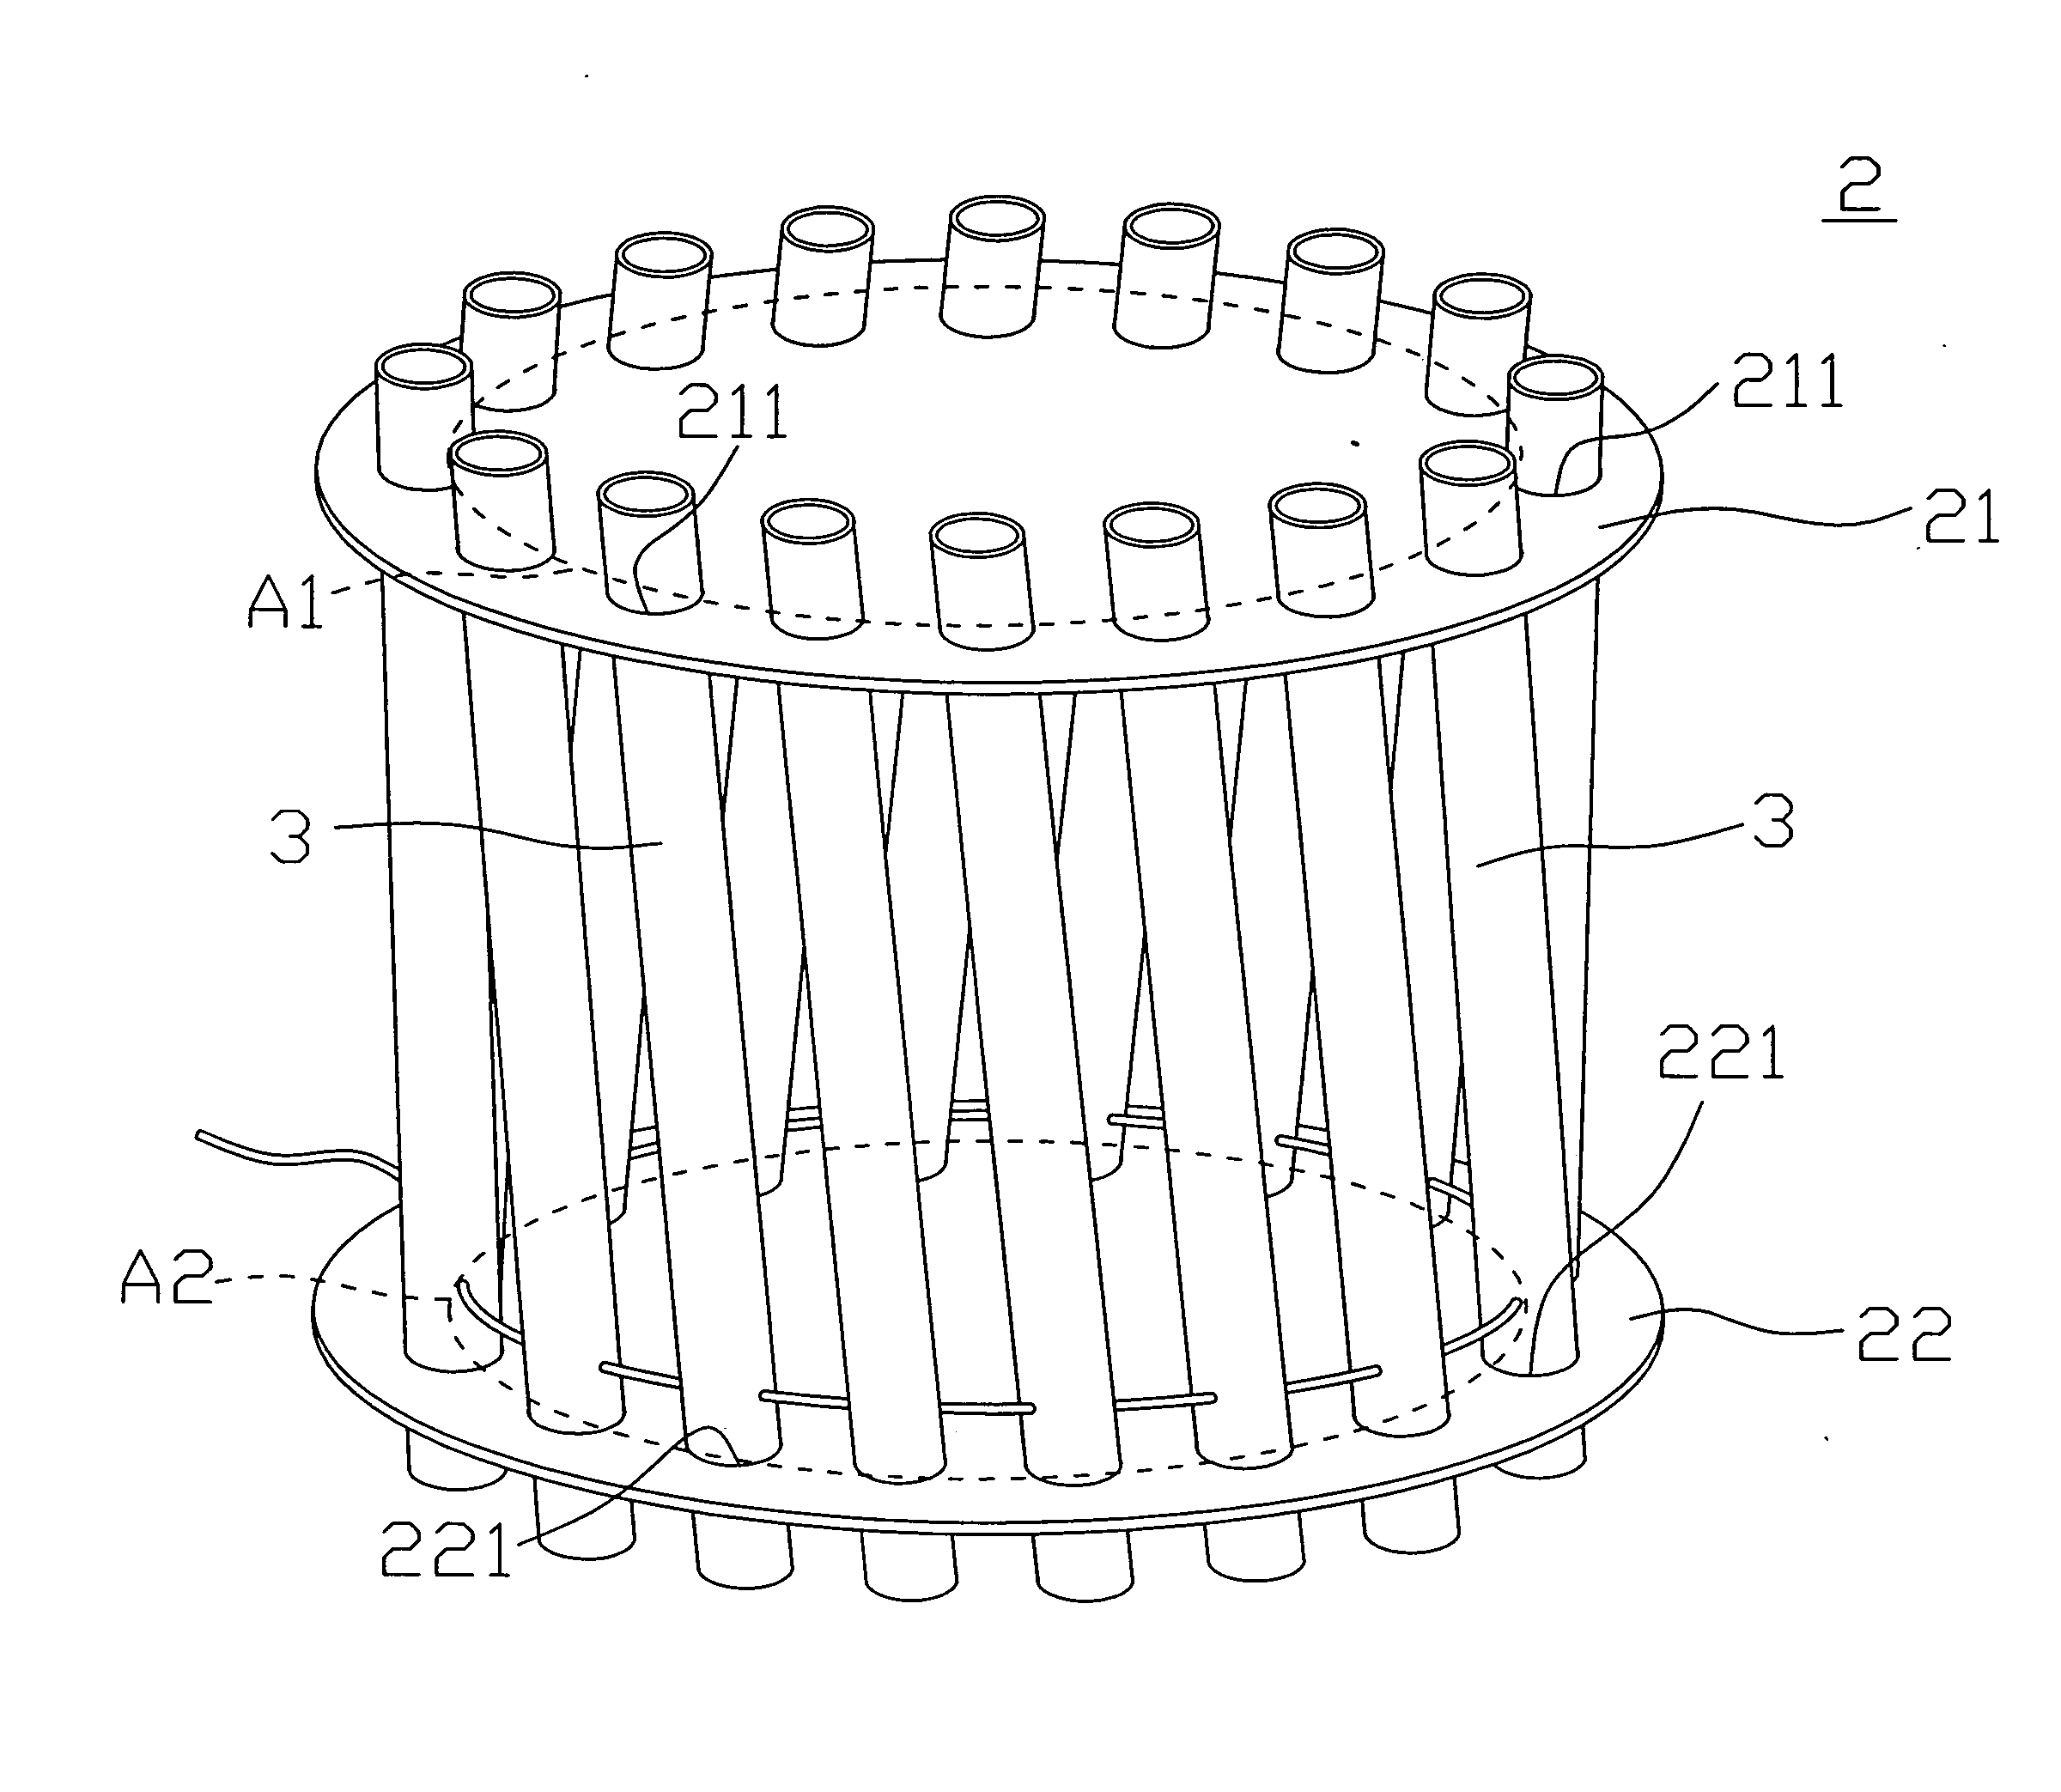 Styling pyrotechnic device